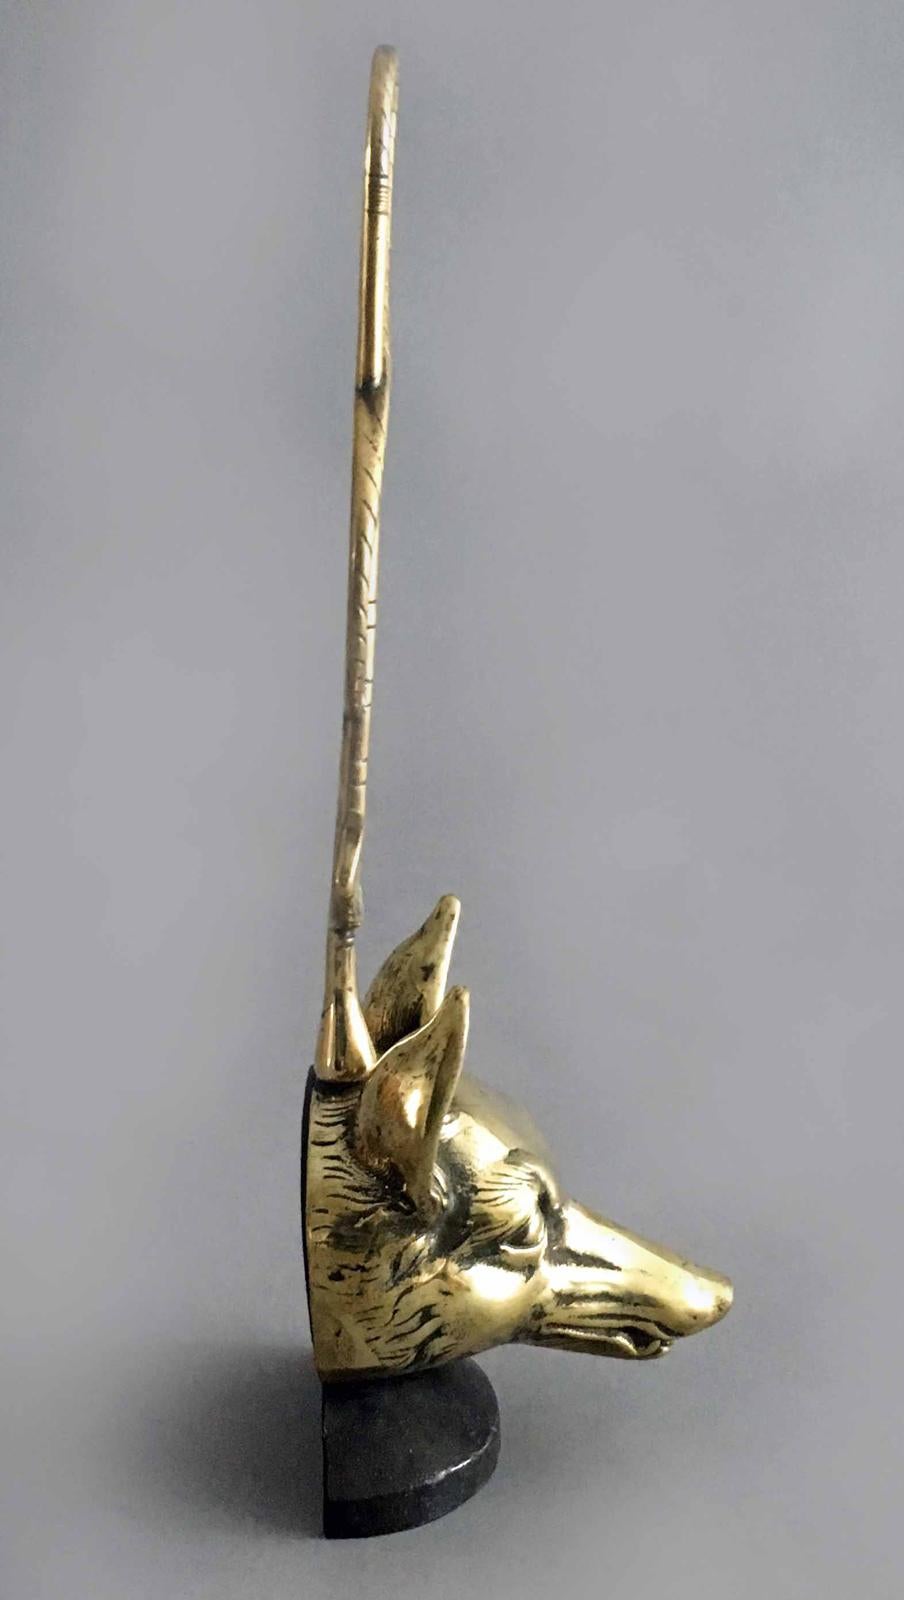 A brass doorstop in the form of a fox’s head with the handle in the form of a riding crop. The doorstop is weighted with lead.